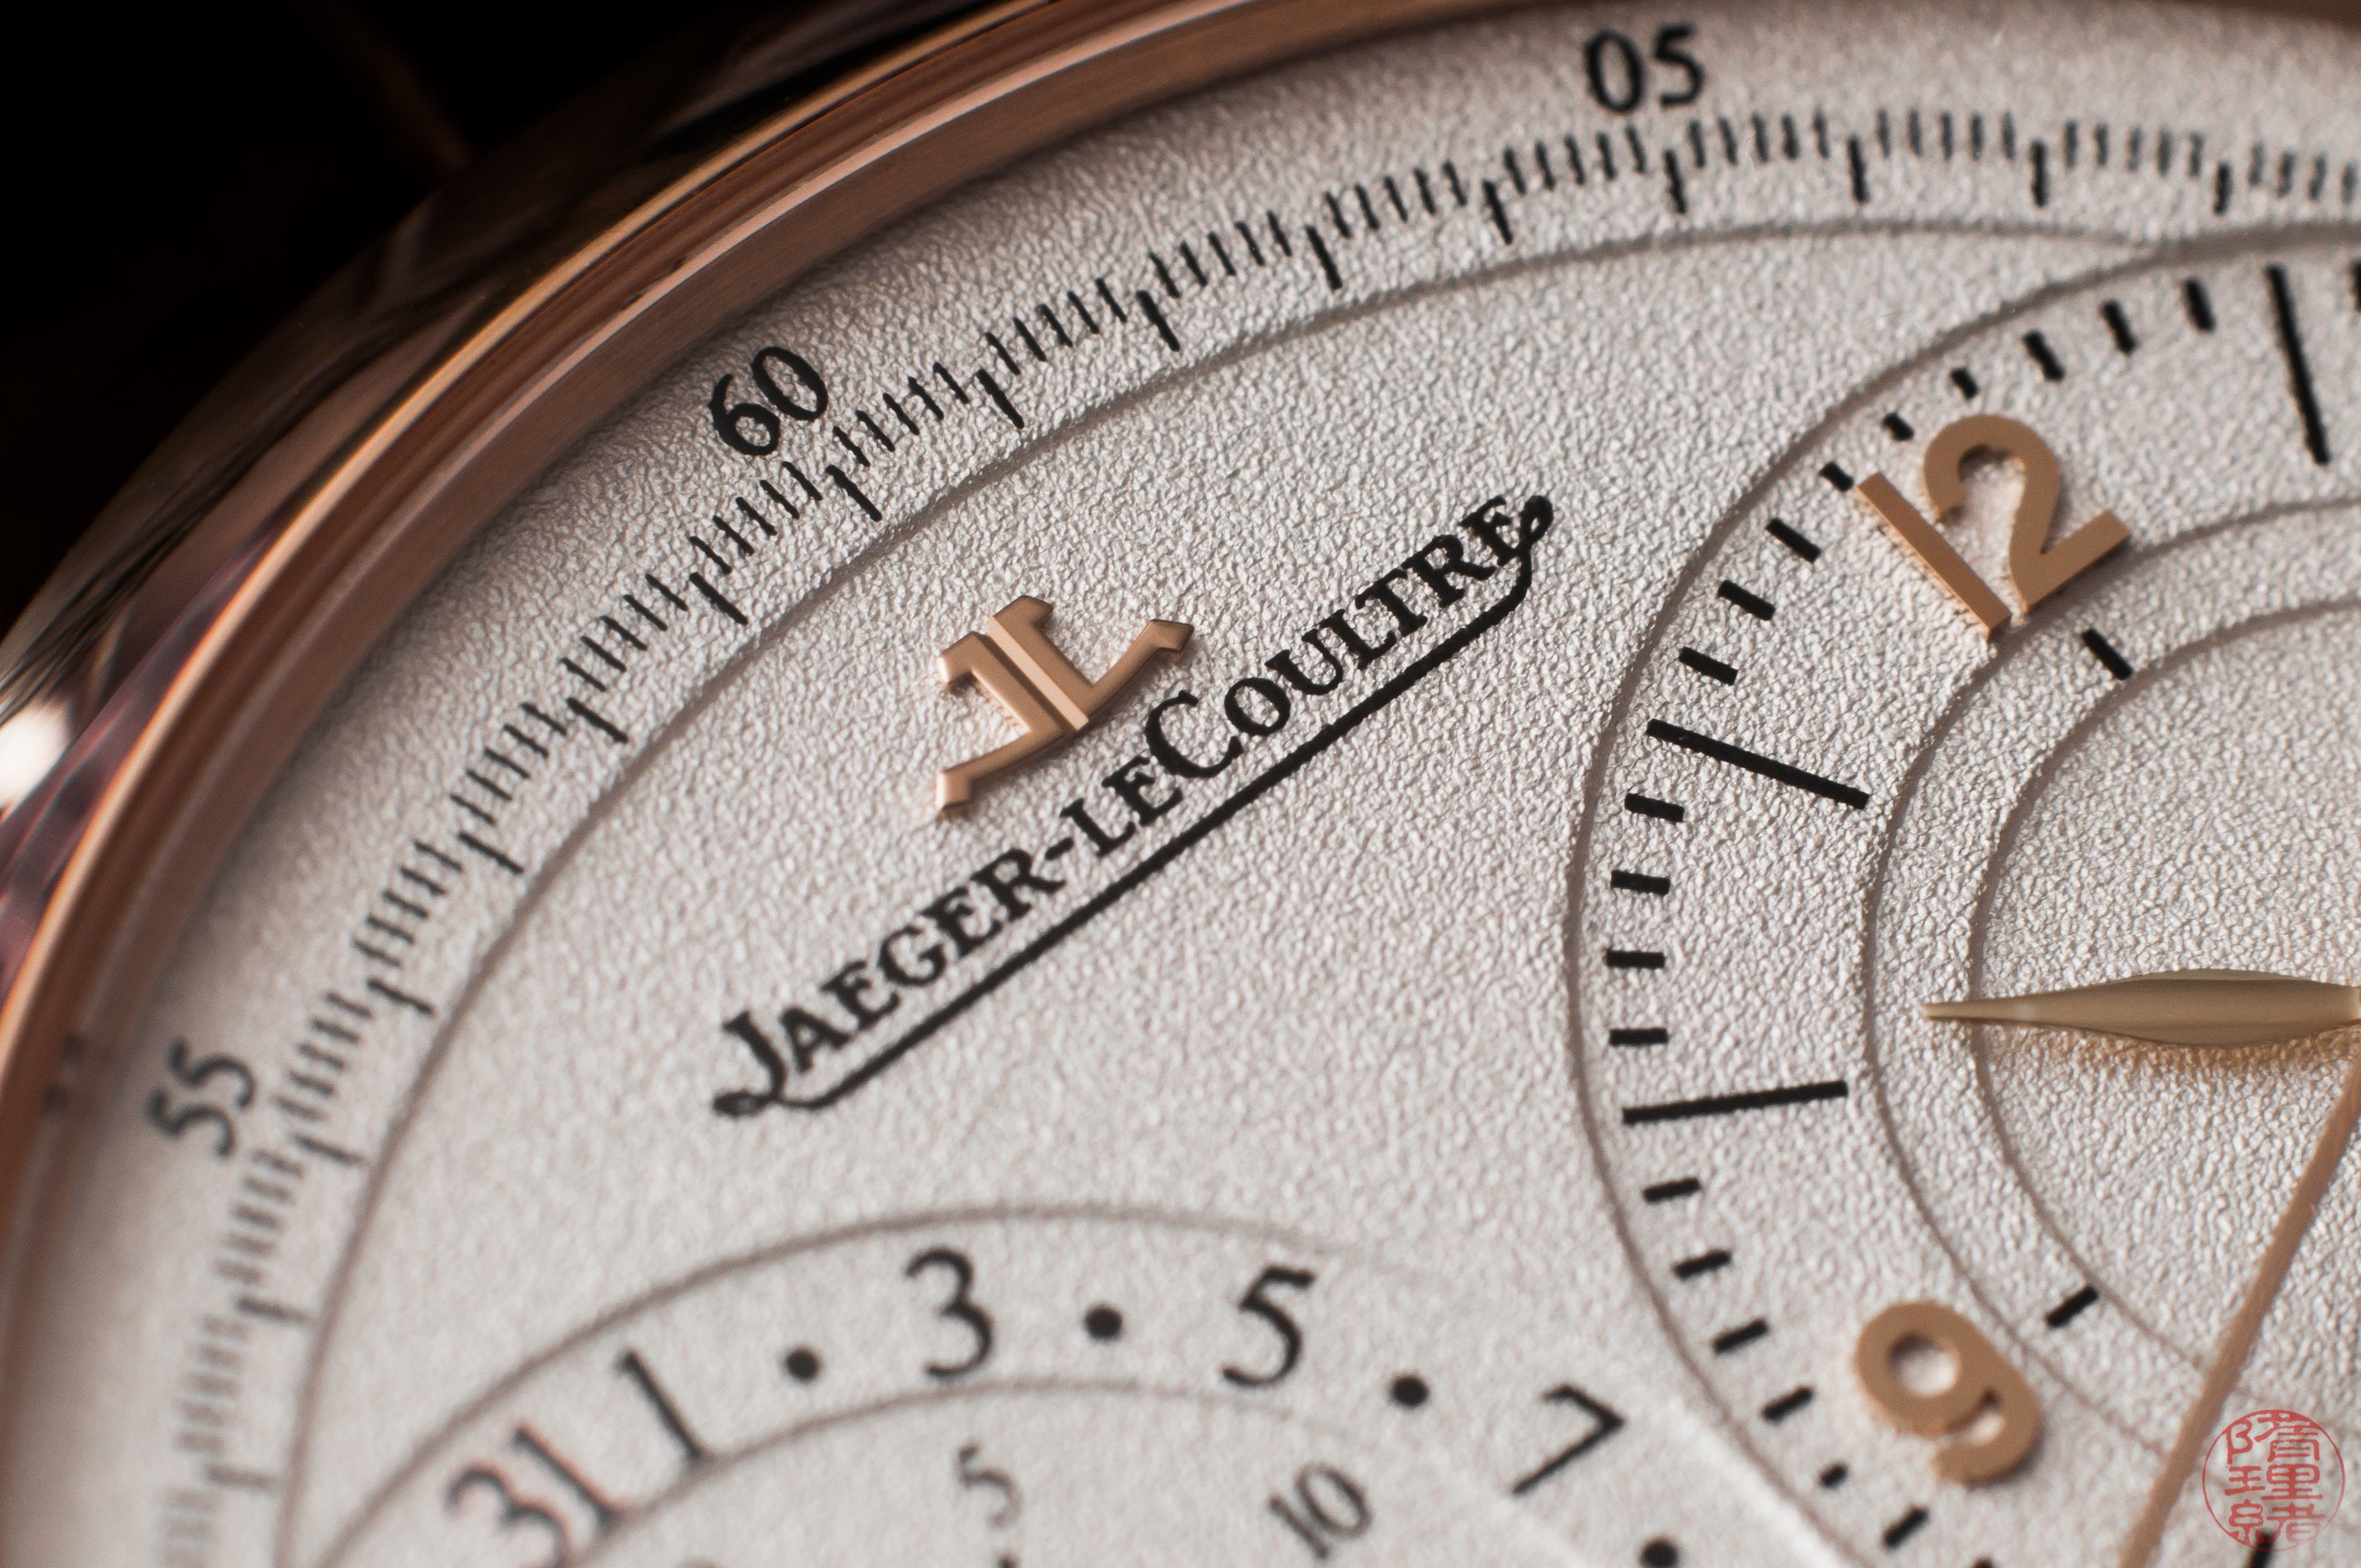 clock, jaeger lecoultre, time, watch